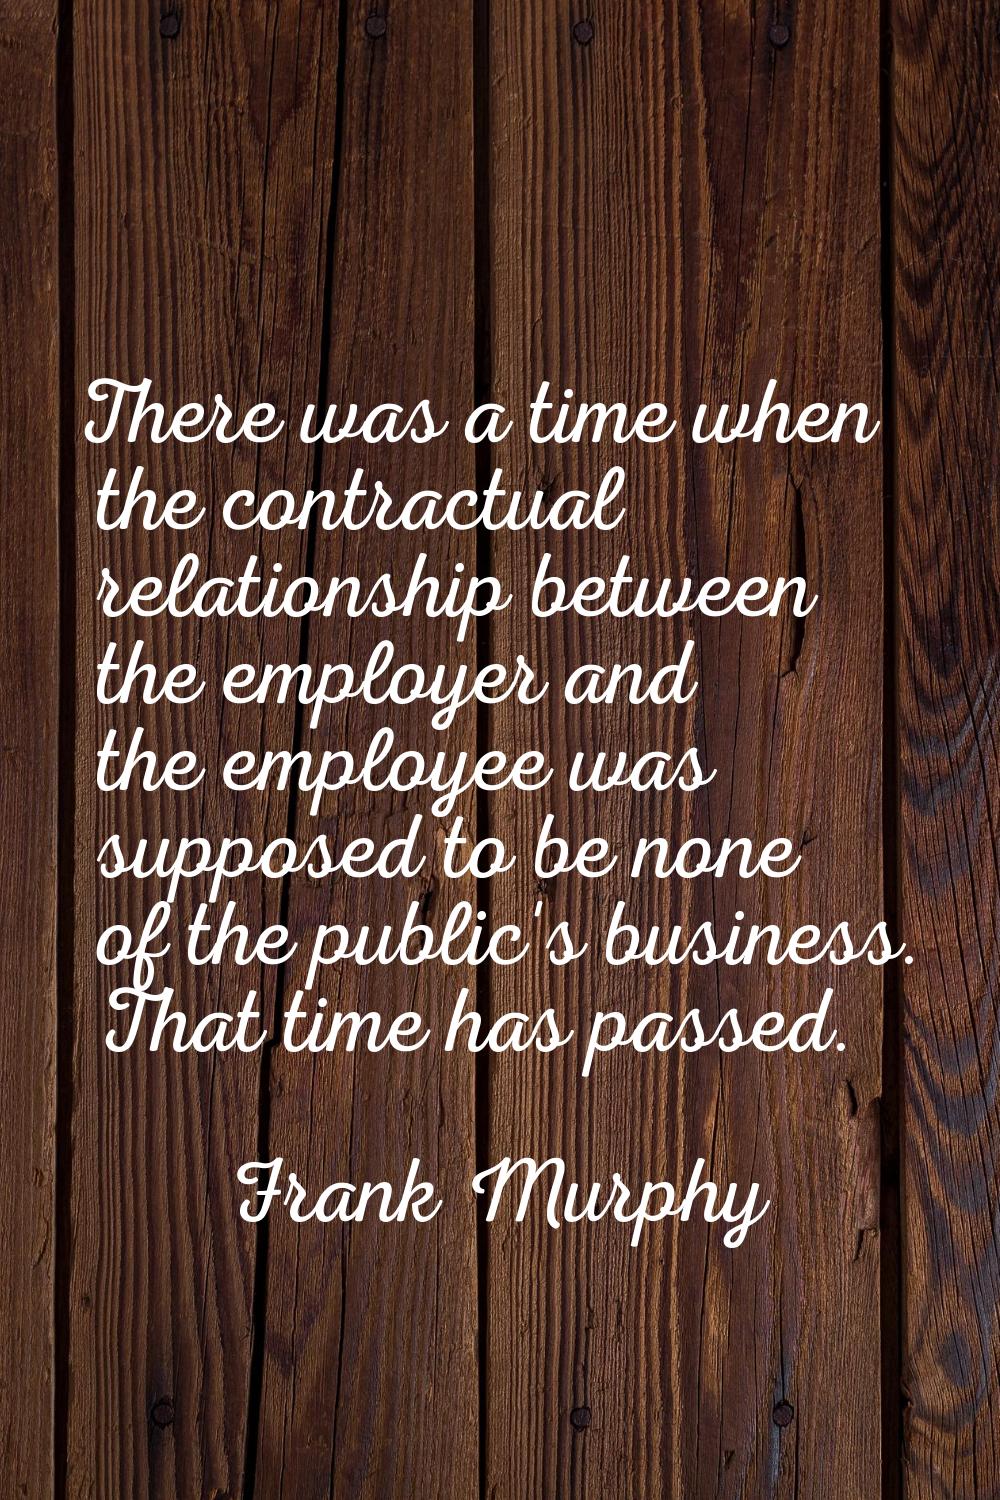 There was a time when the contractual relationship between the employer and the employee was suppos